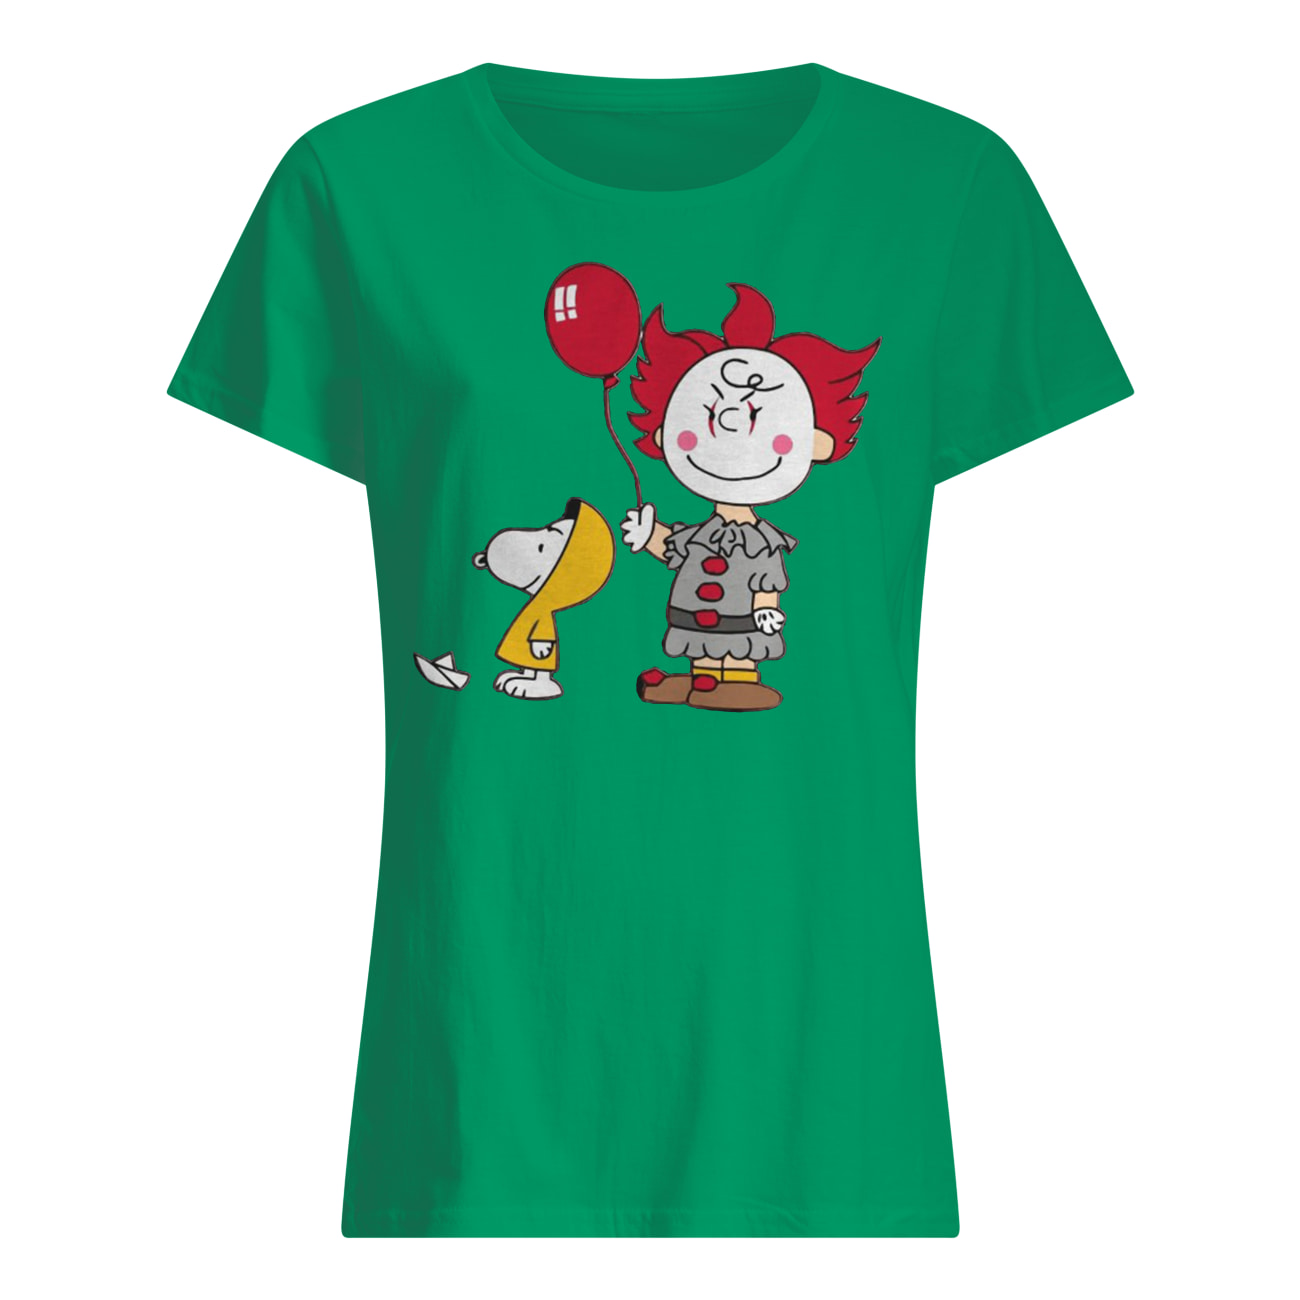 Chris brown and woodstock pennywise womens shirt